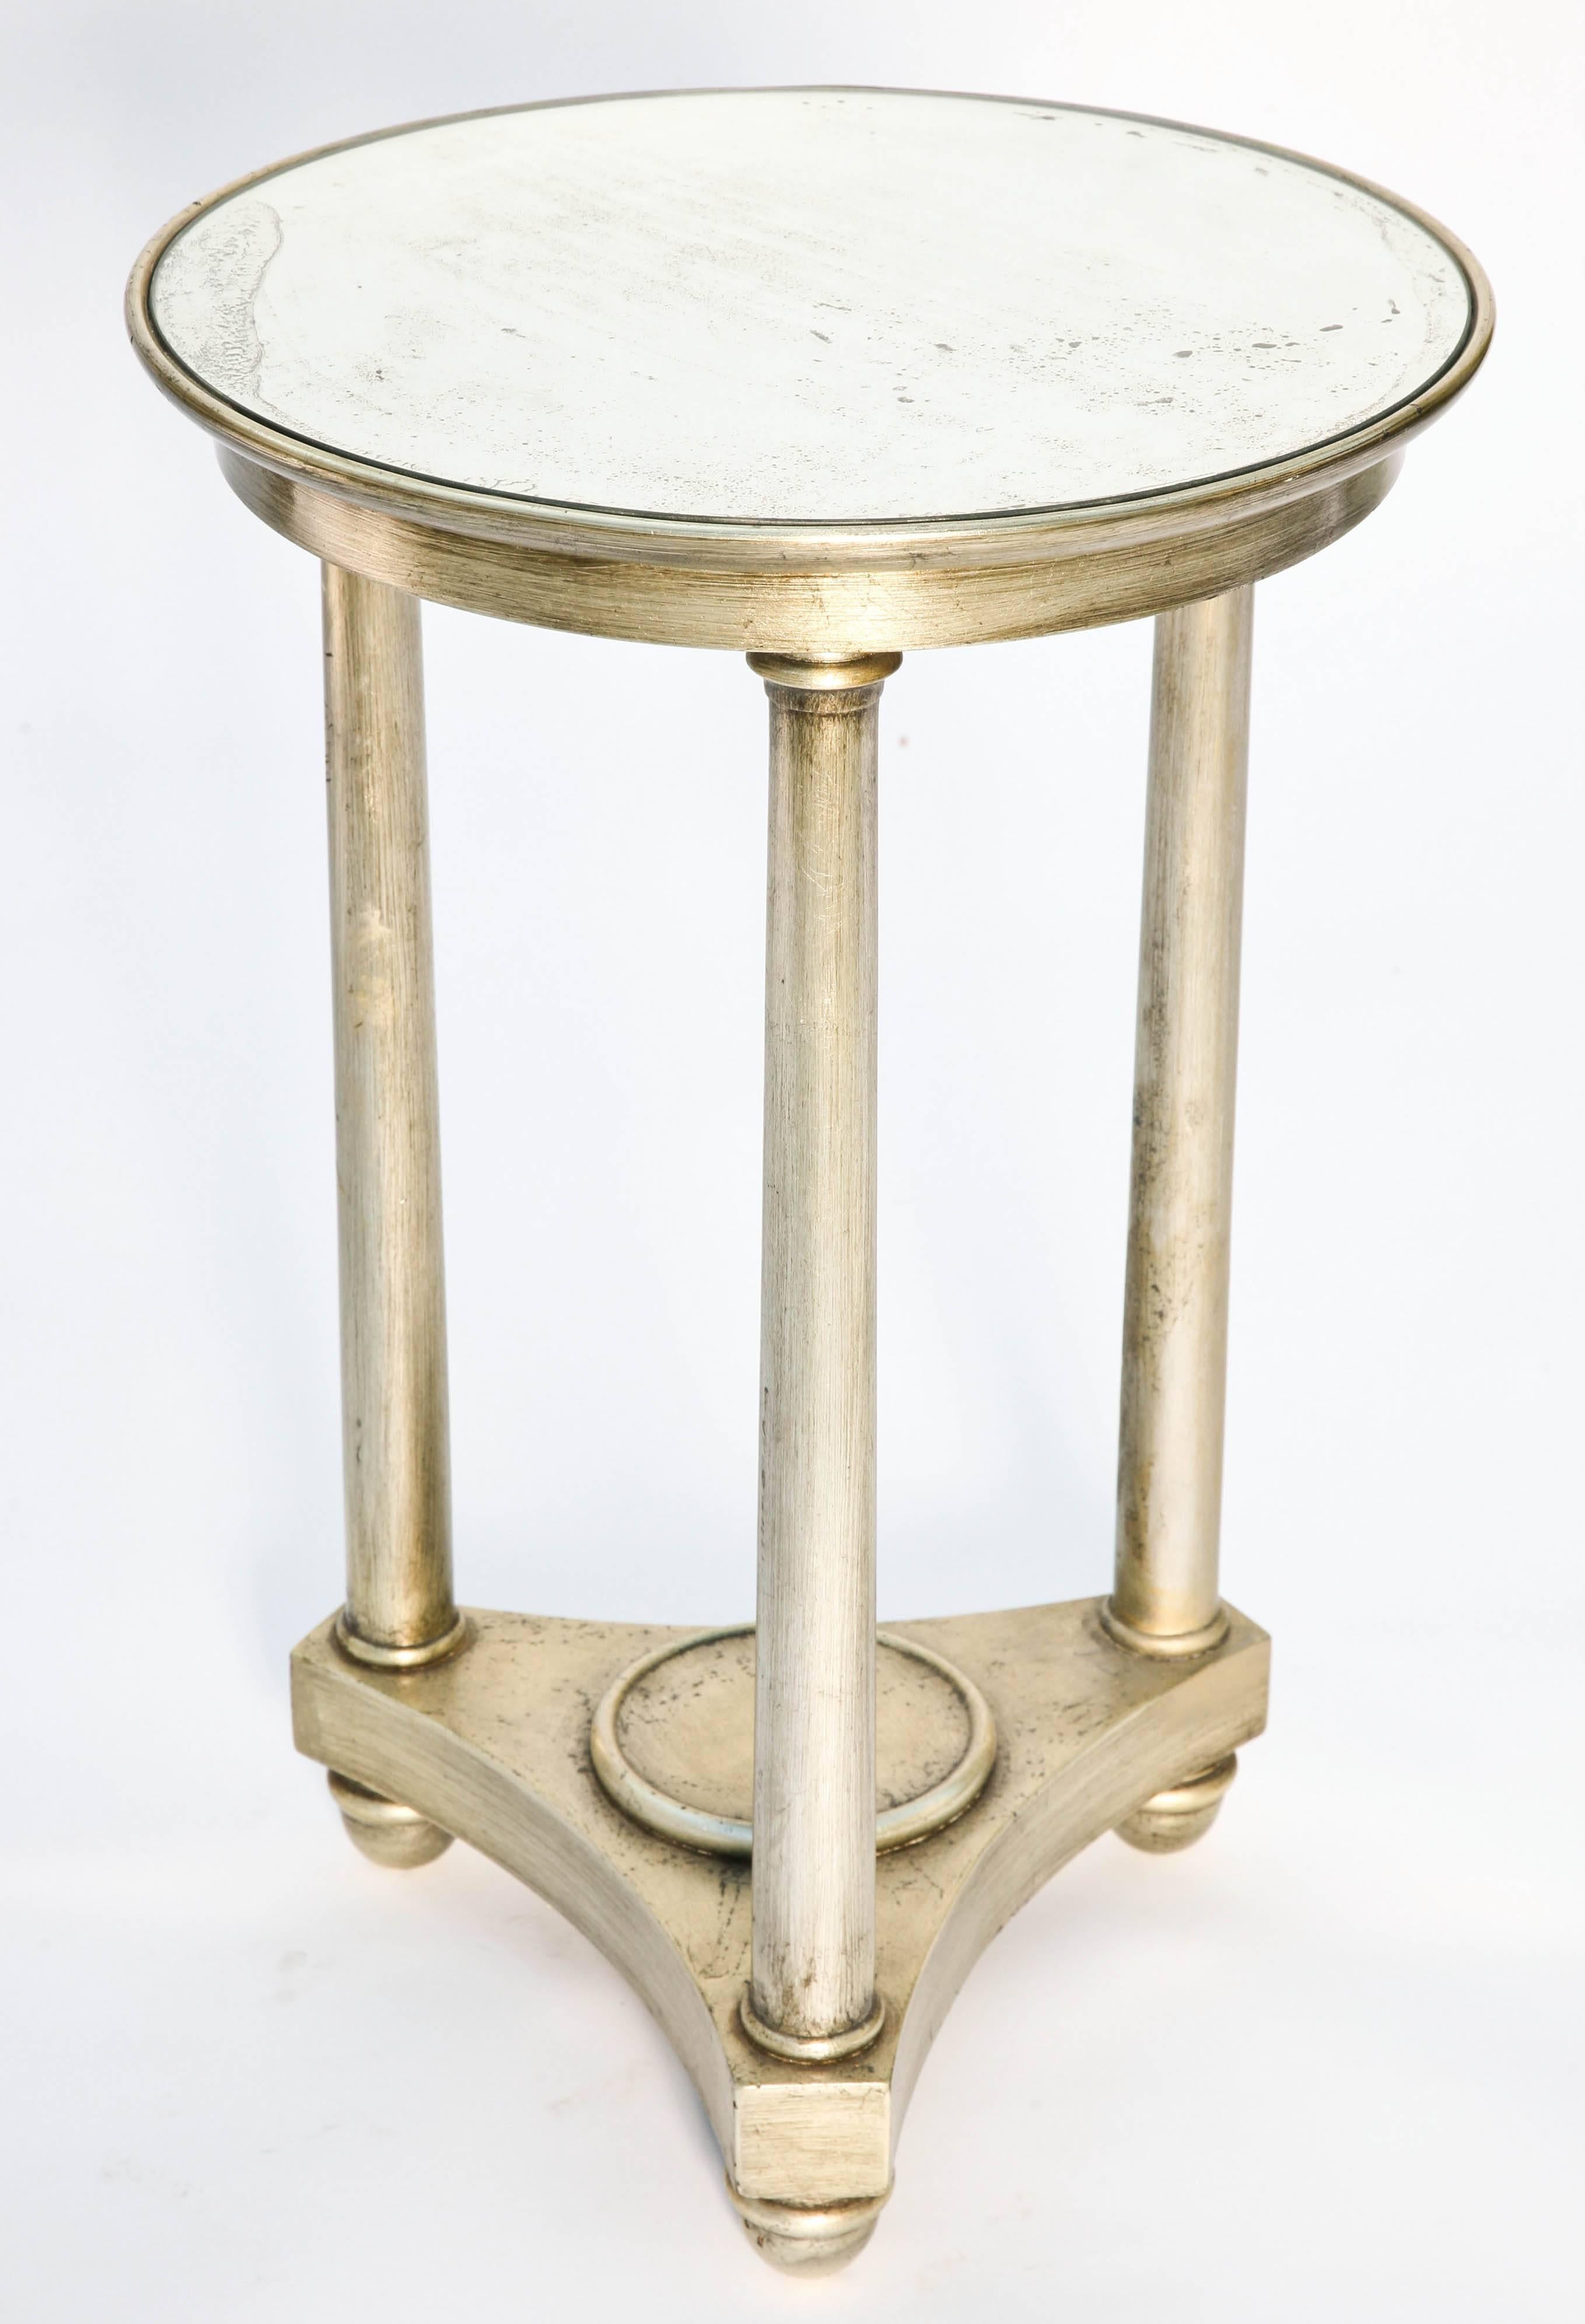 Round table, in Empire taste, of silver giltwood, having distressed mirrored top inset in frame, raised on three round column form legs on tripartite base, on bun feet.

Stock ID: D3838